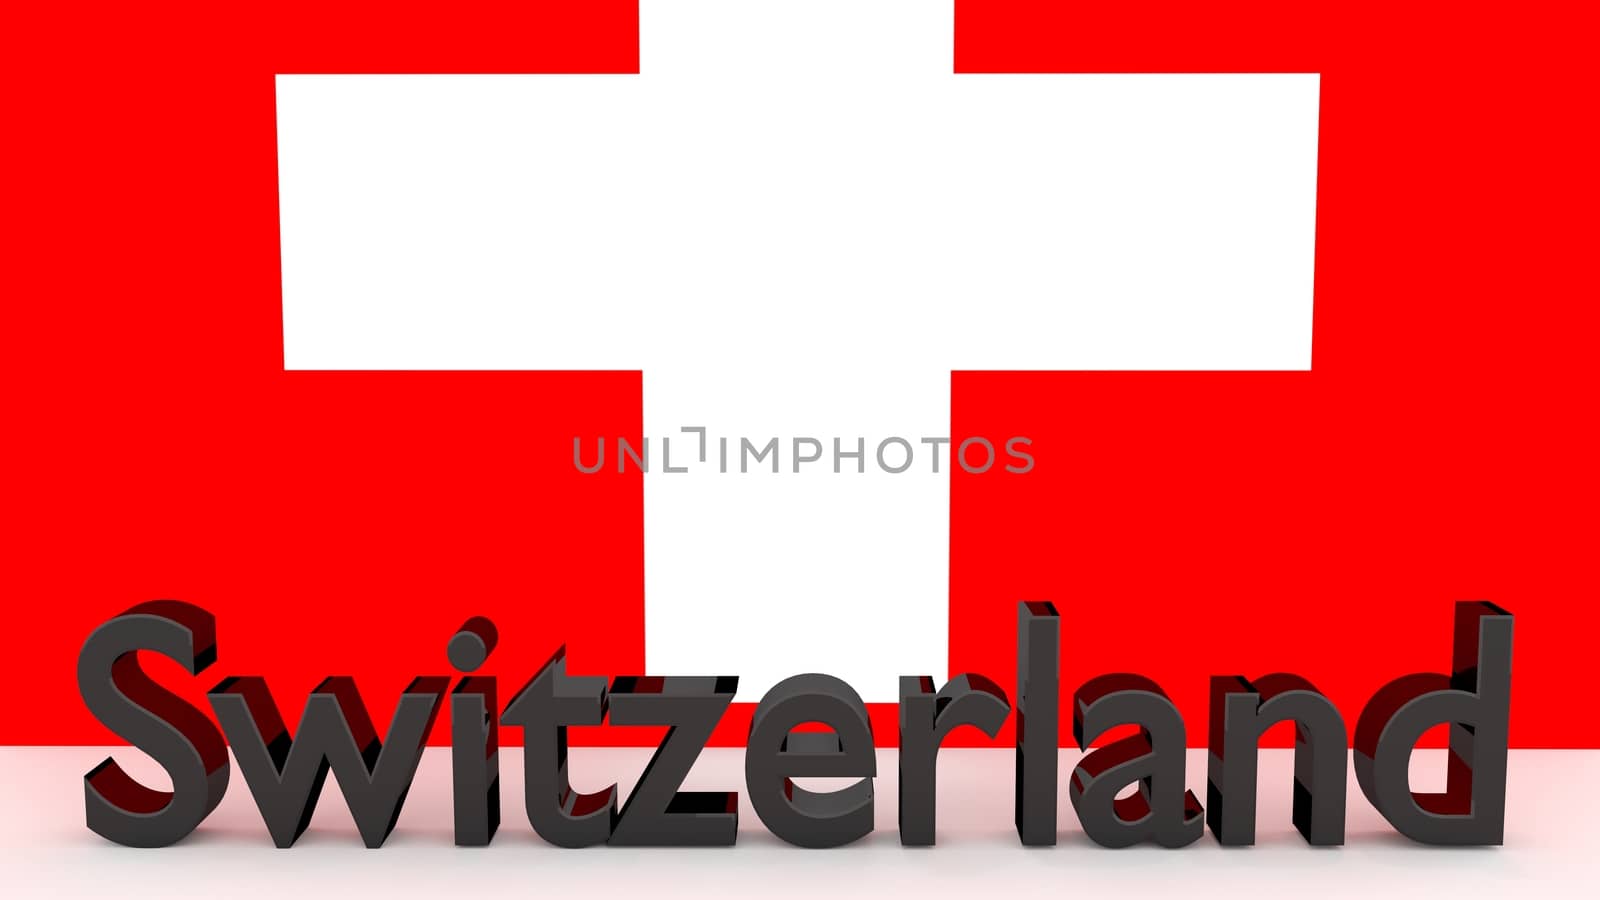 Writing Switzerland in front of a swiss flag